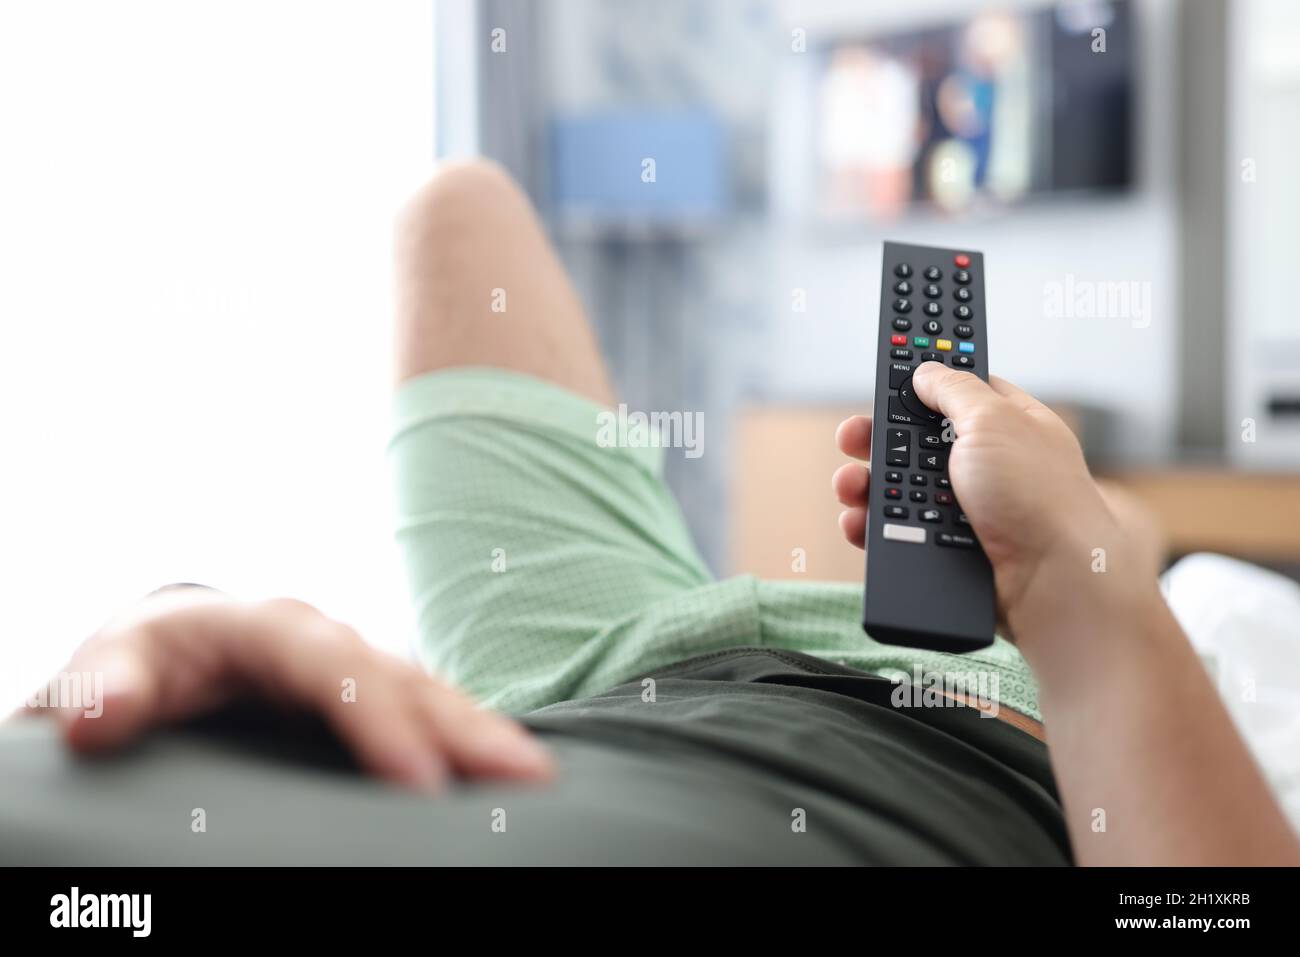 Man lies on bed and switches buttons on TV remote control Stock Photo